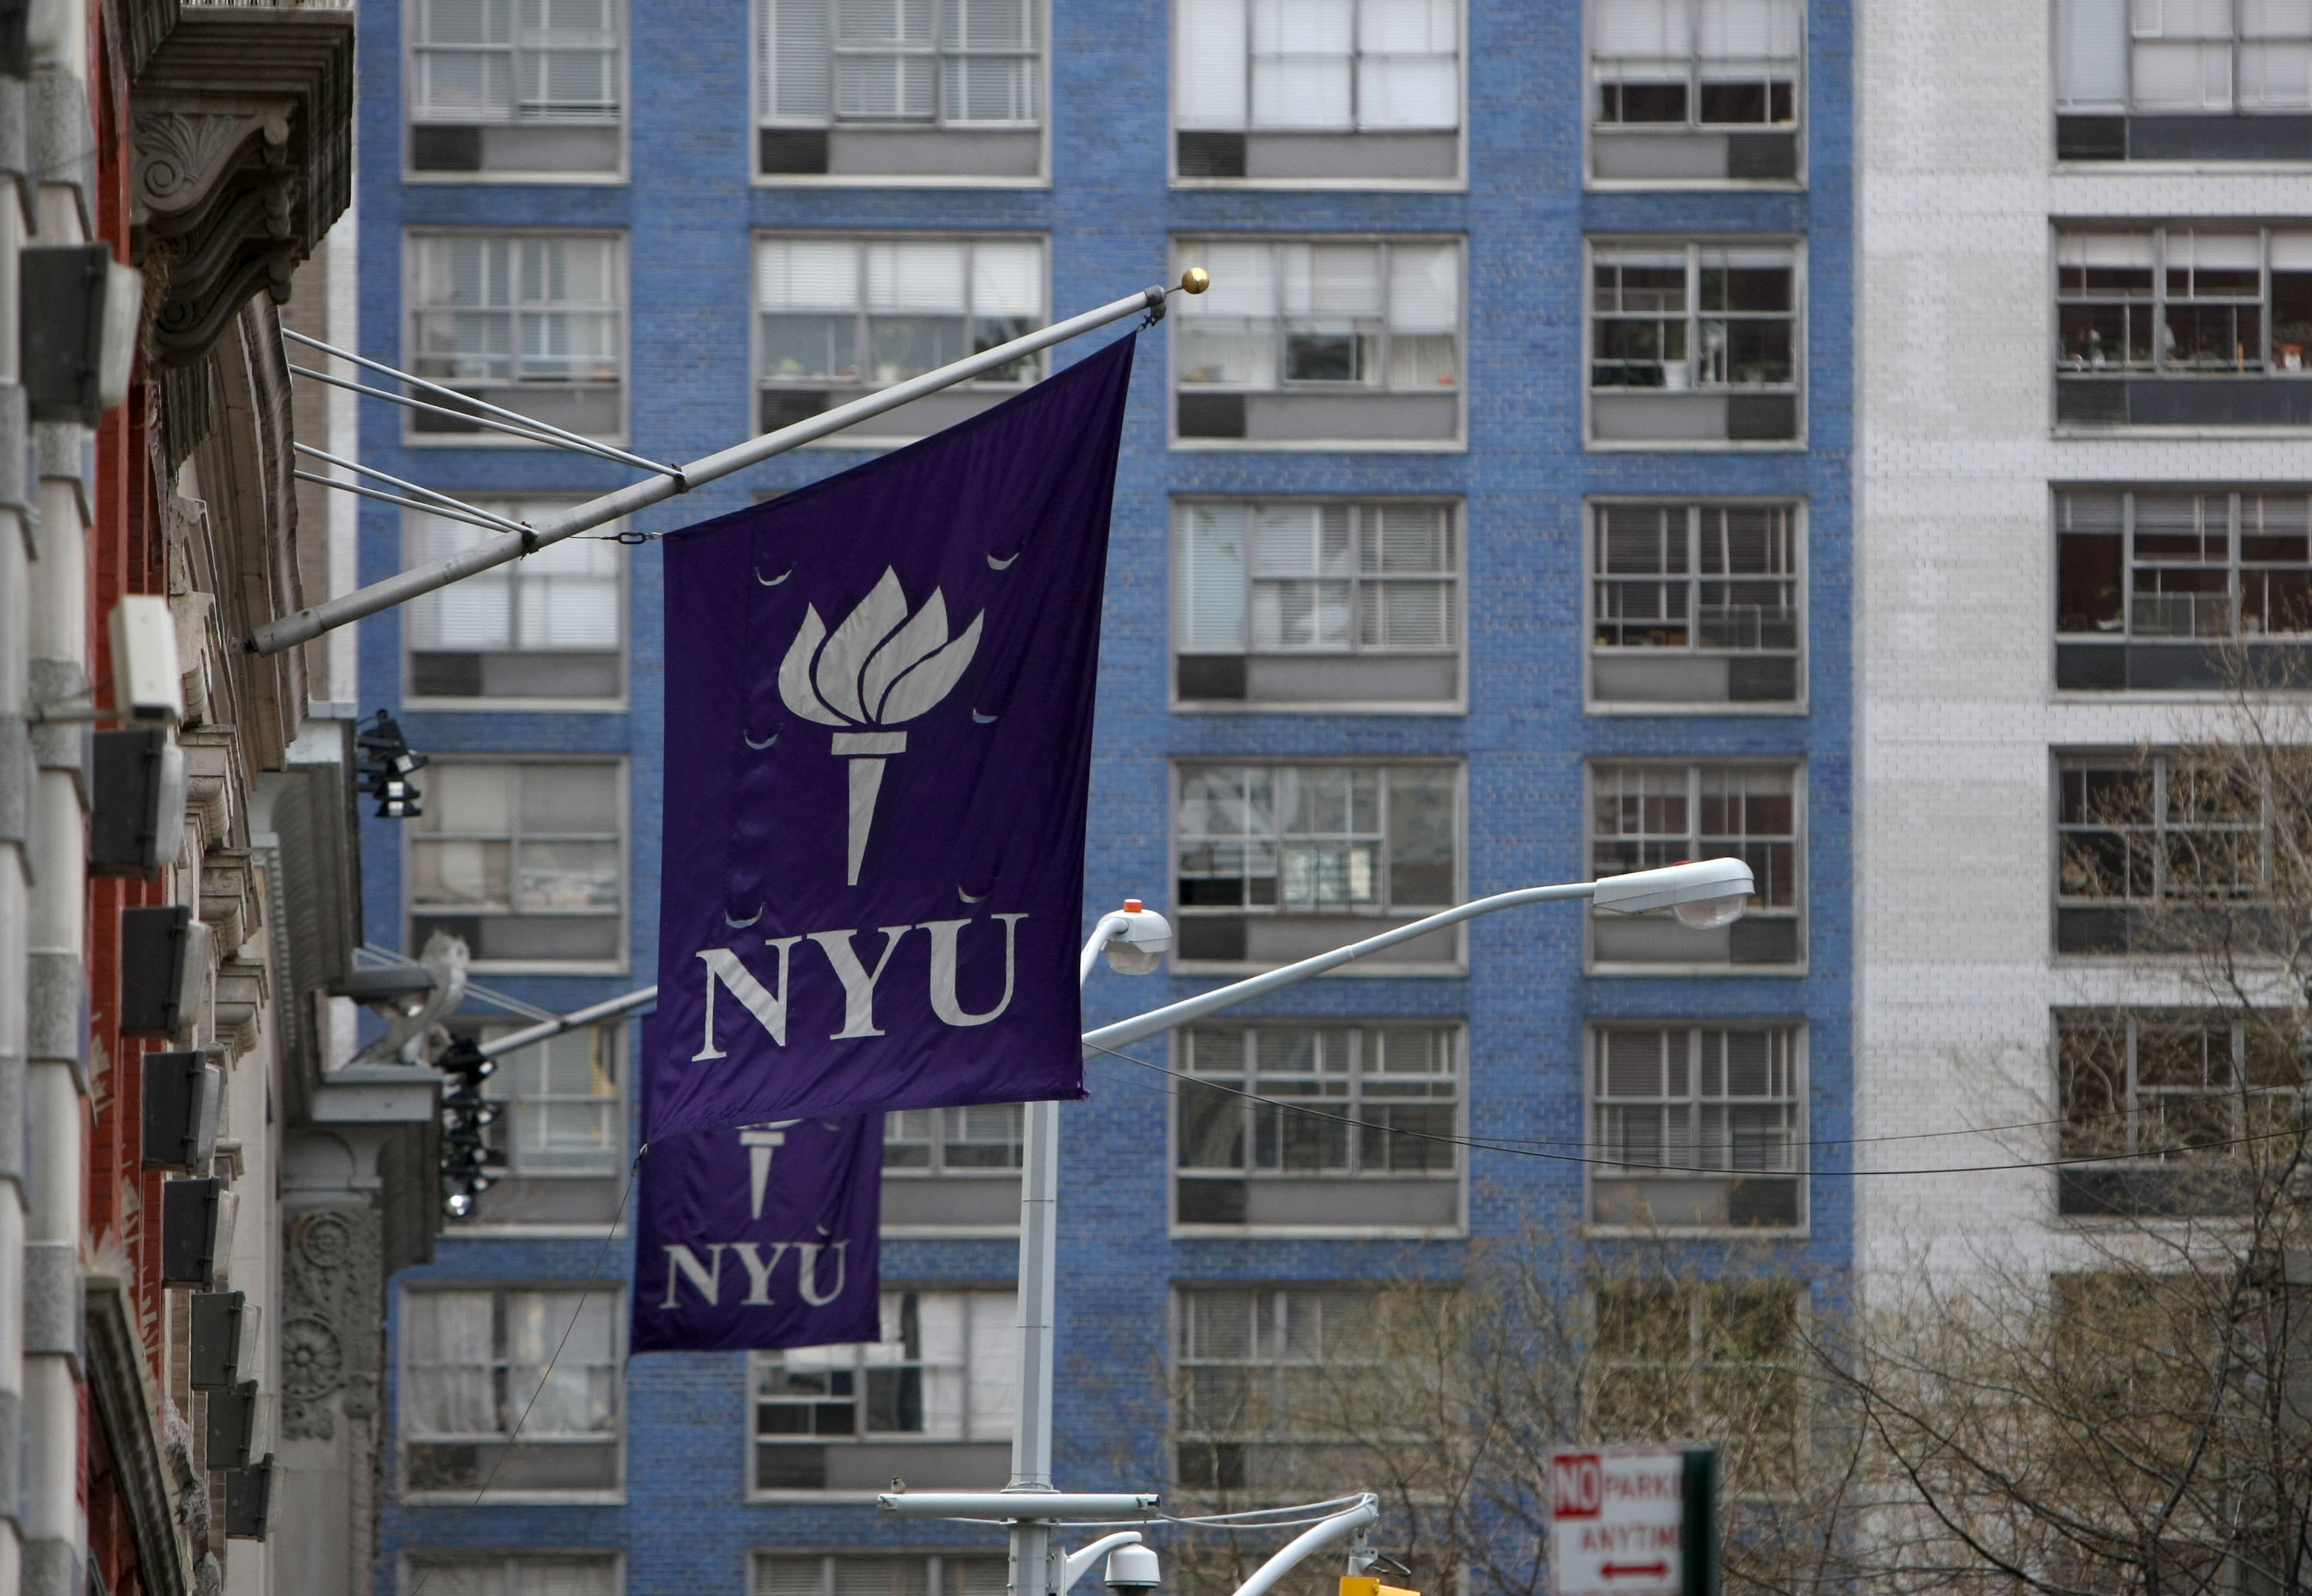 New York University banners hang from a building in New York, U.S., on Monday, April 5, 2010. (Jin Lee—Bloomberg/Getty Images)